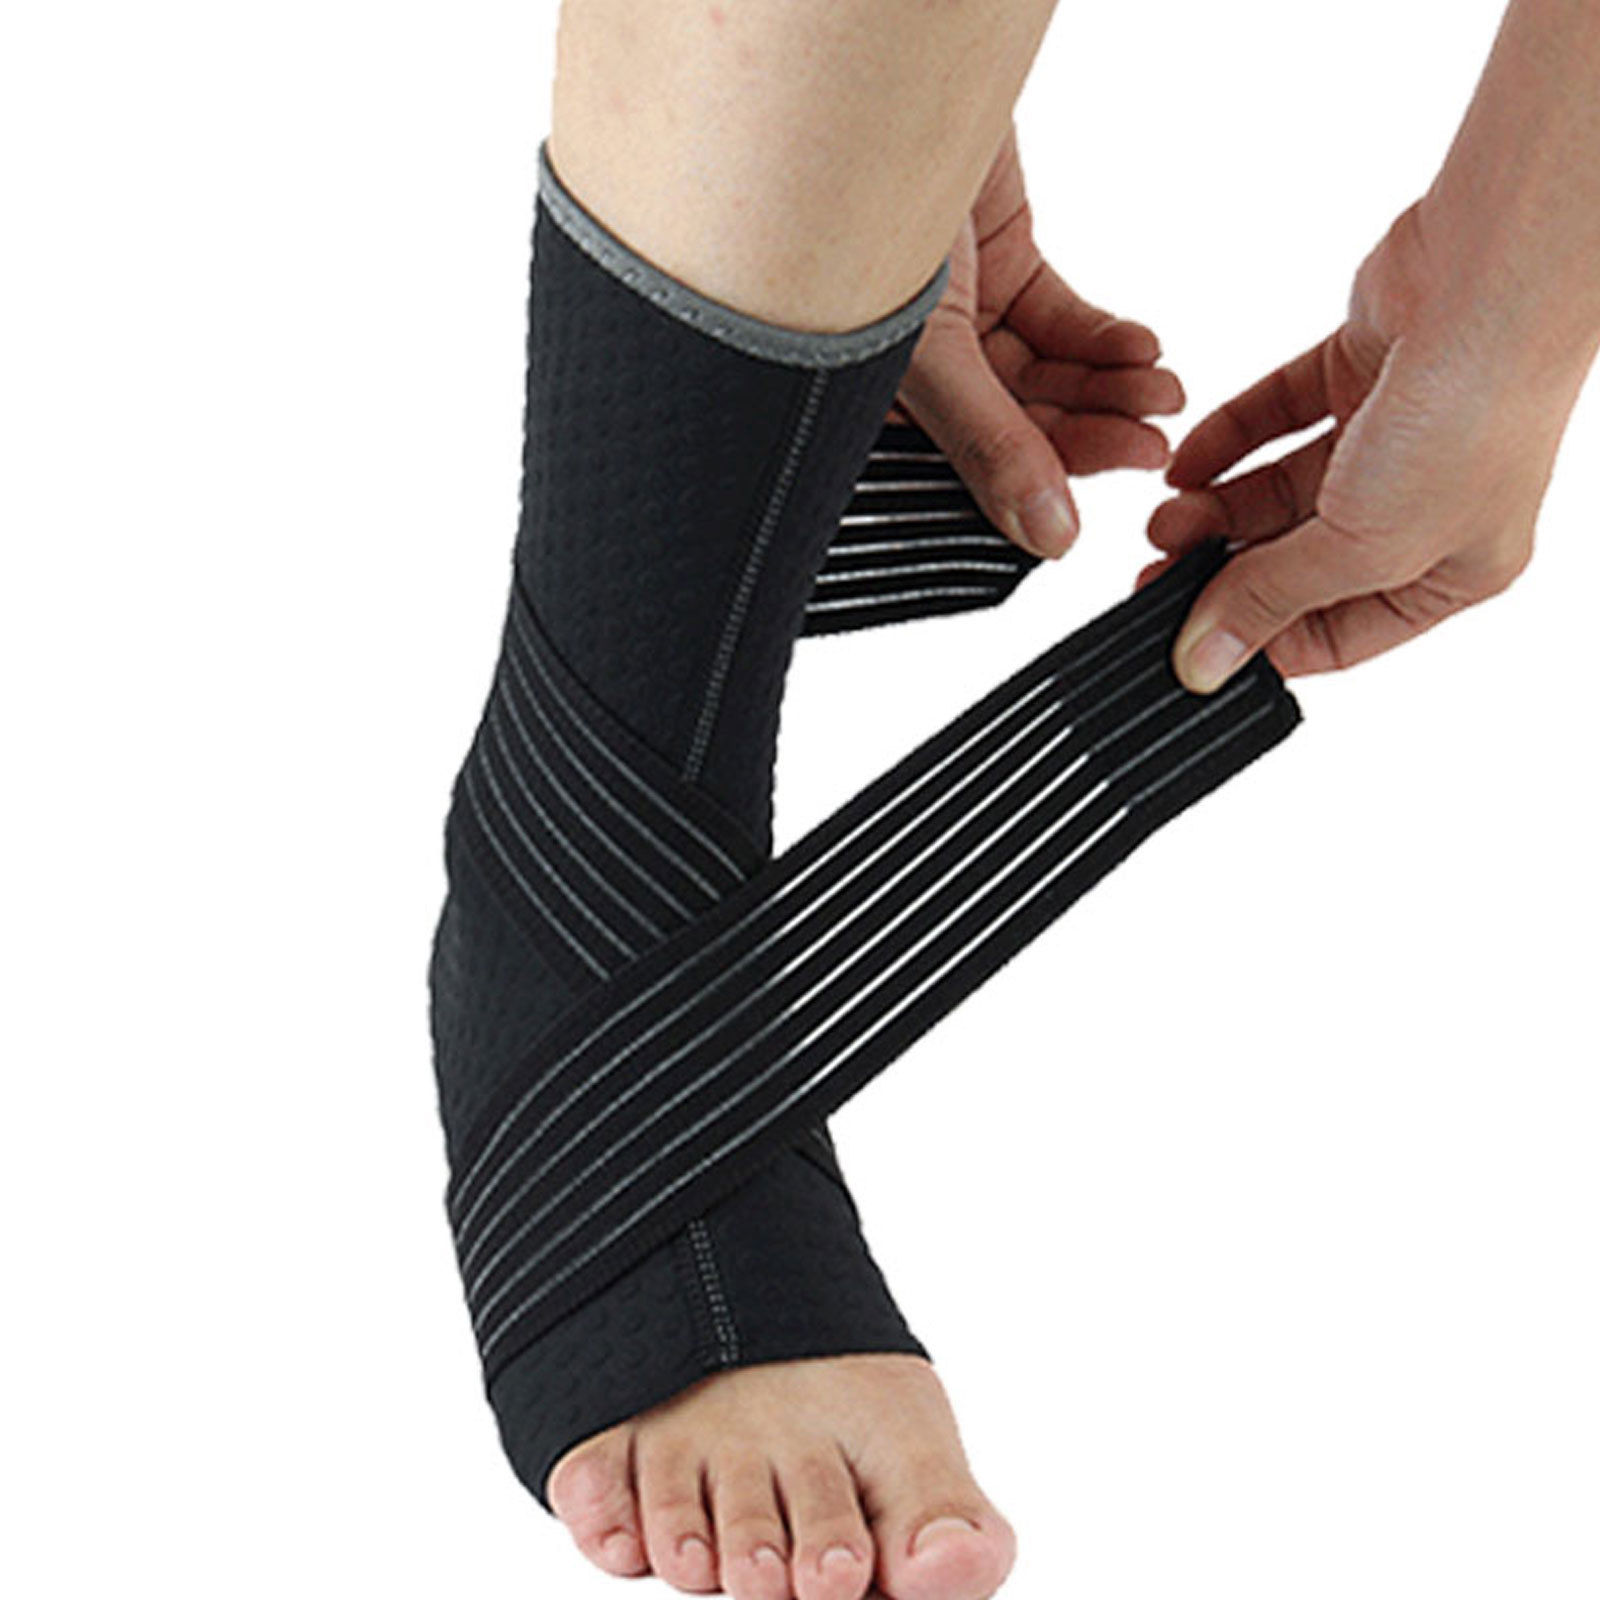 2x Ankle Support Brace - Nuova Health